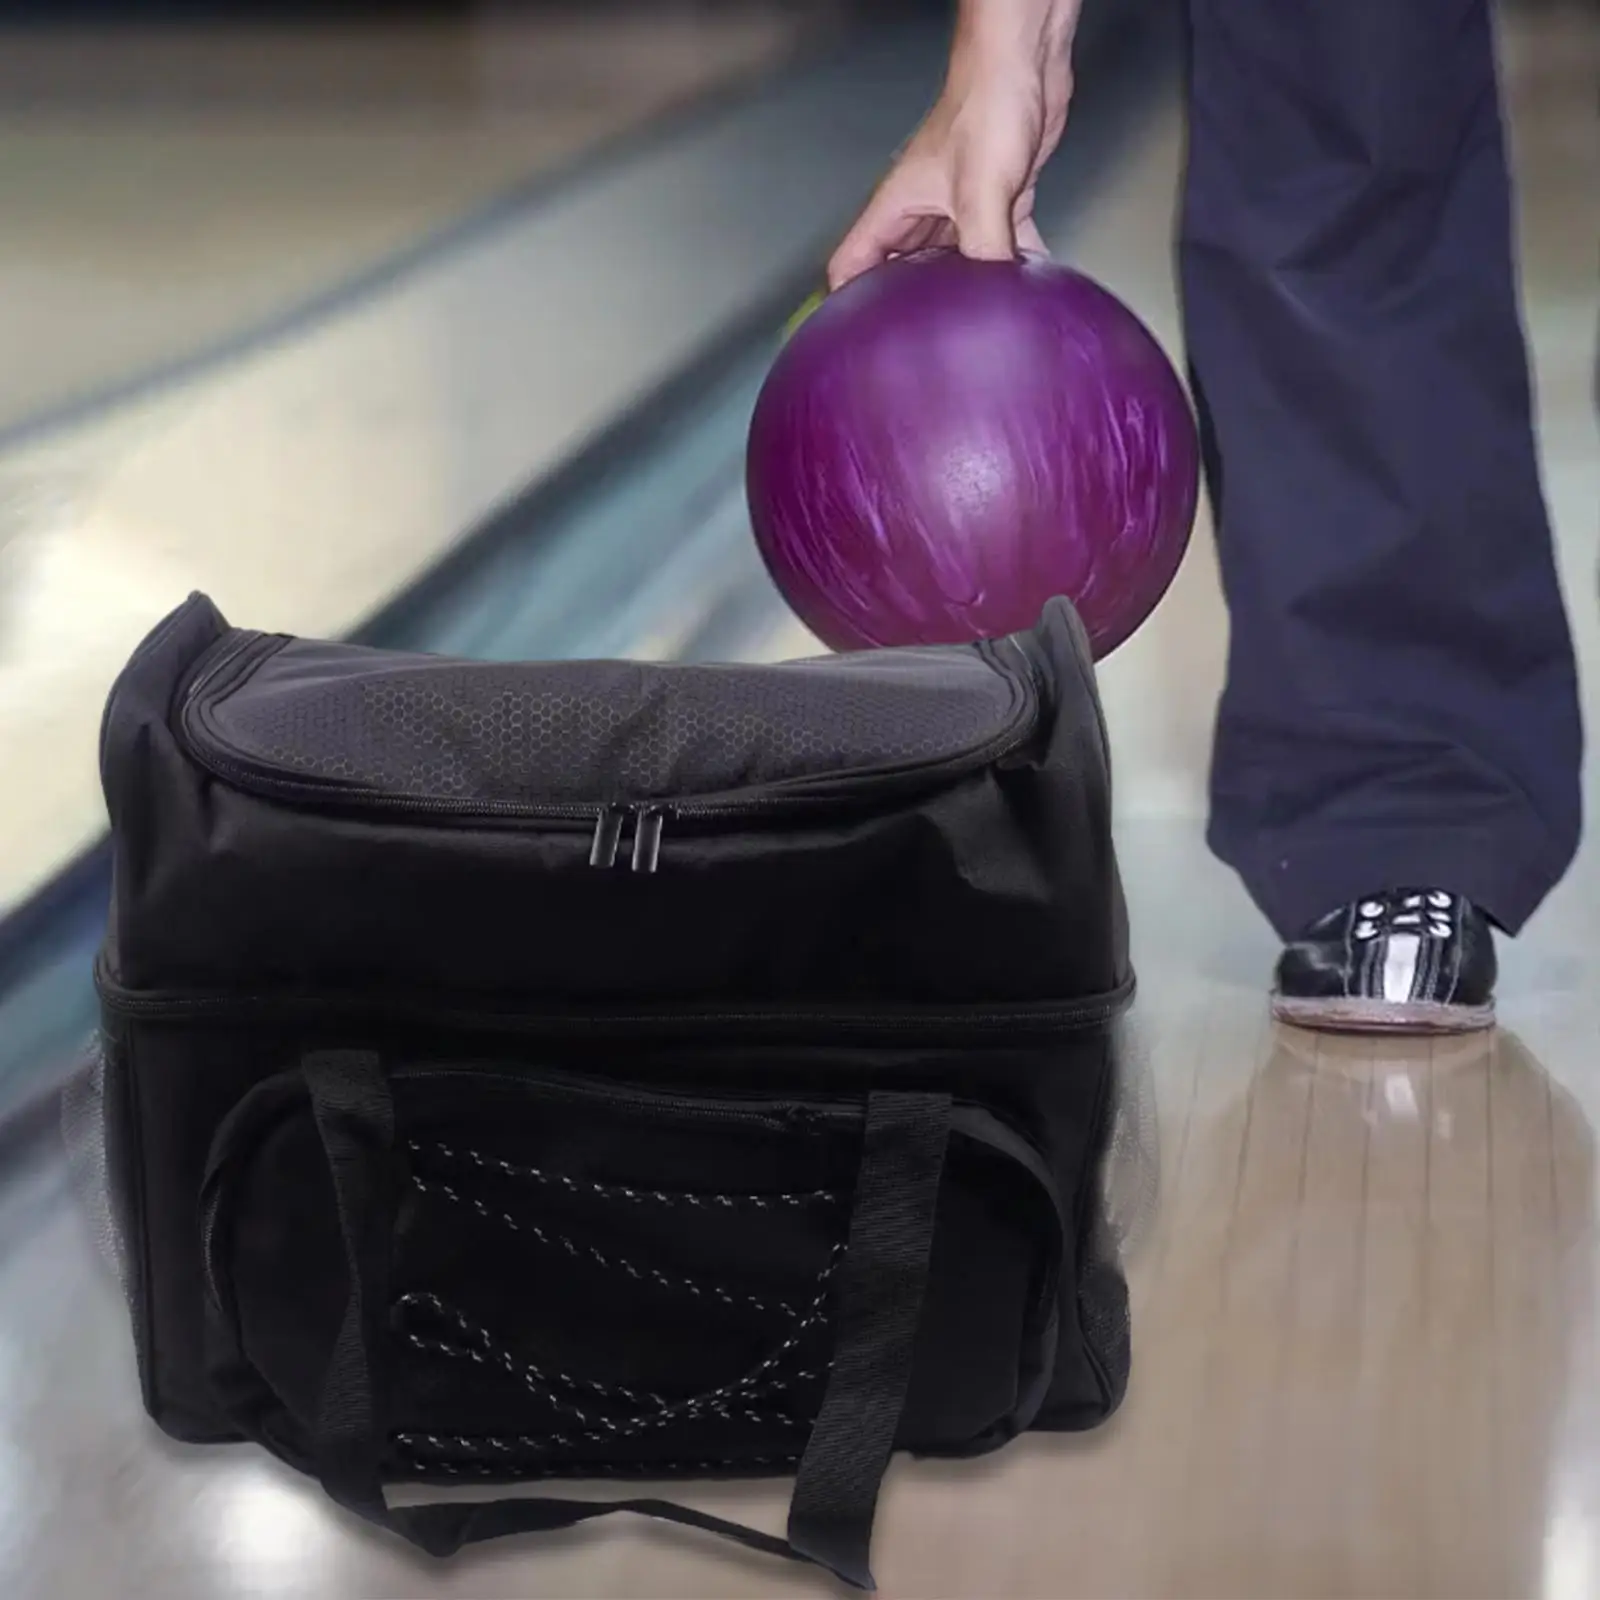 Bowling Bag for Double Balls Carrying Case Protector Bowling Ball Tote Fits Bowling Shoes up to Mens Size 16 Bowling Accessory